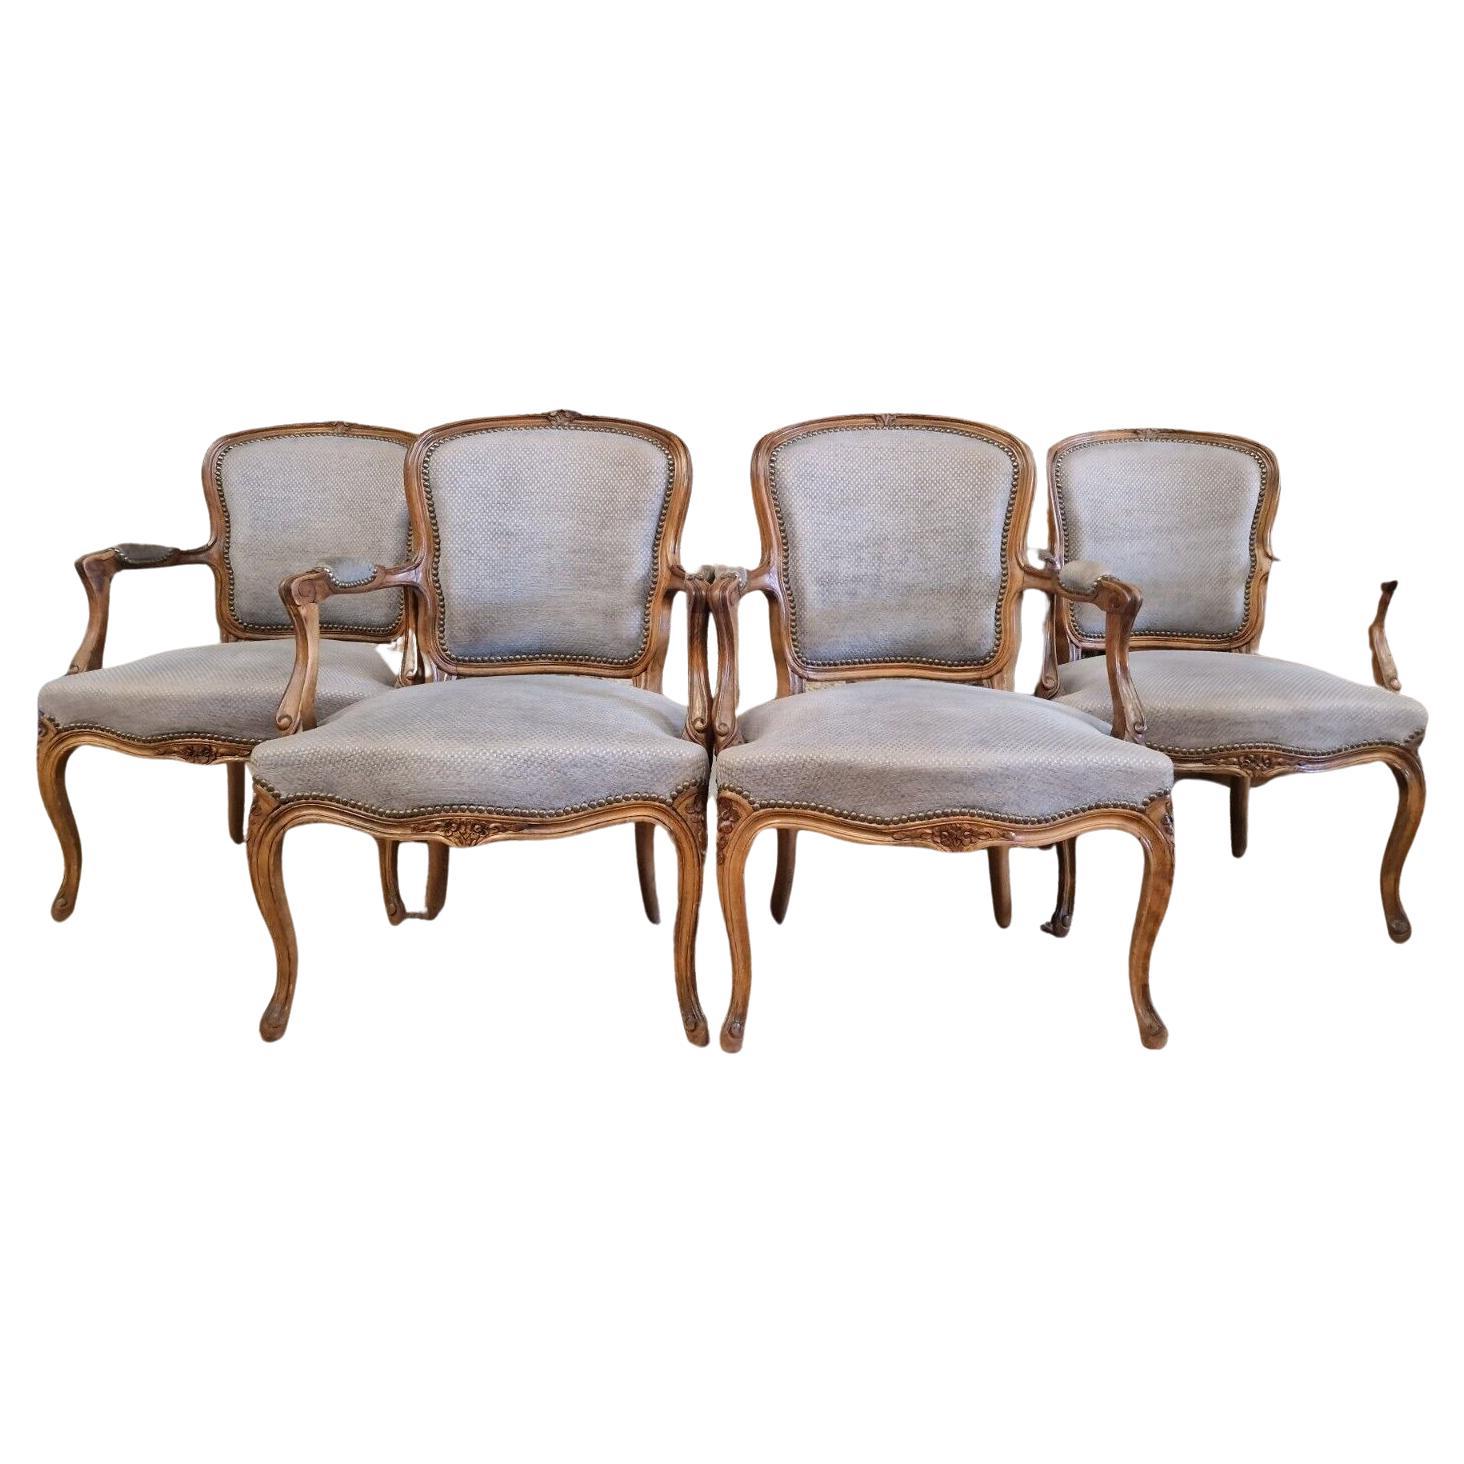 Antique French Armchairs Suite of 4